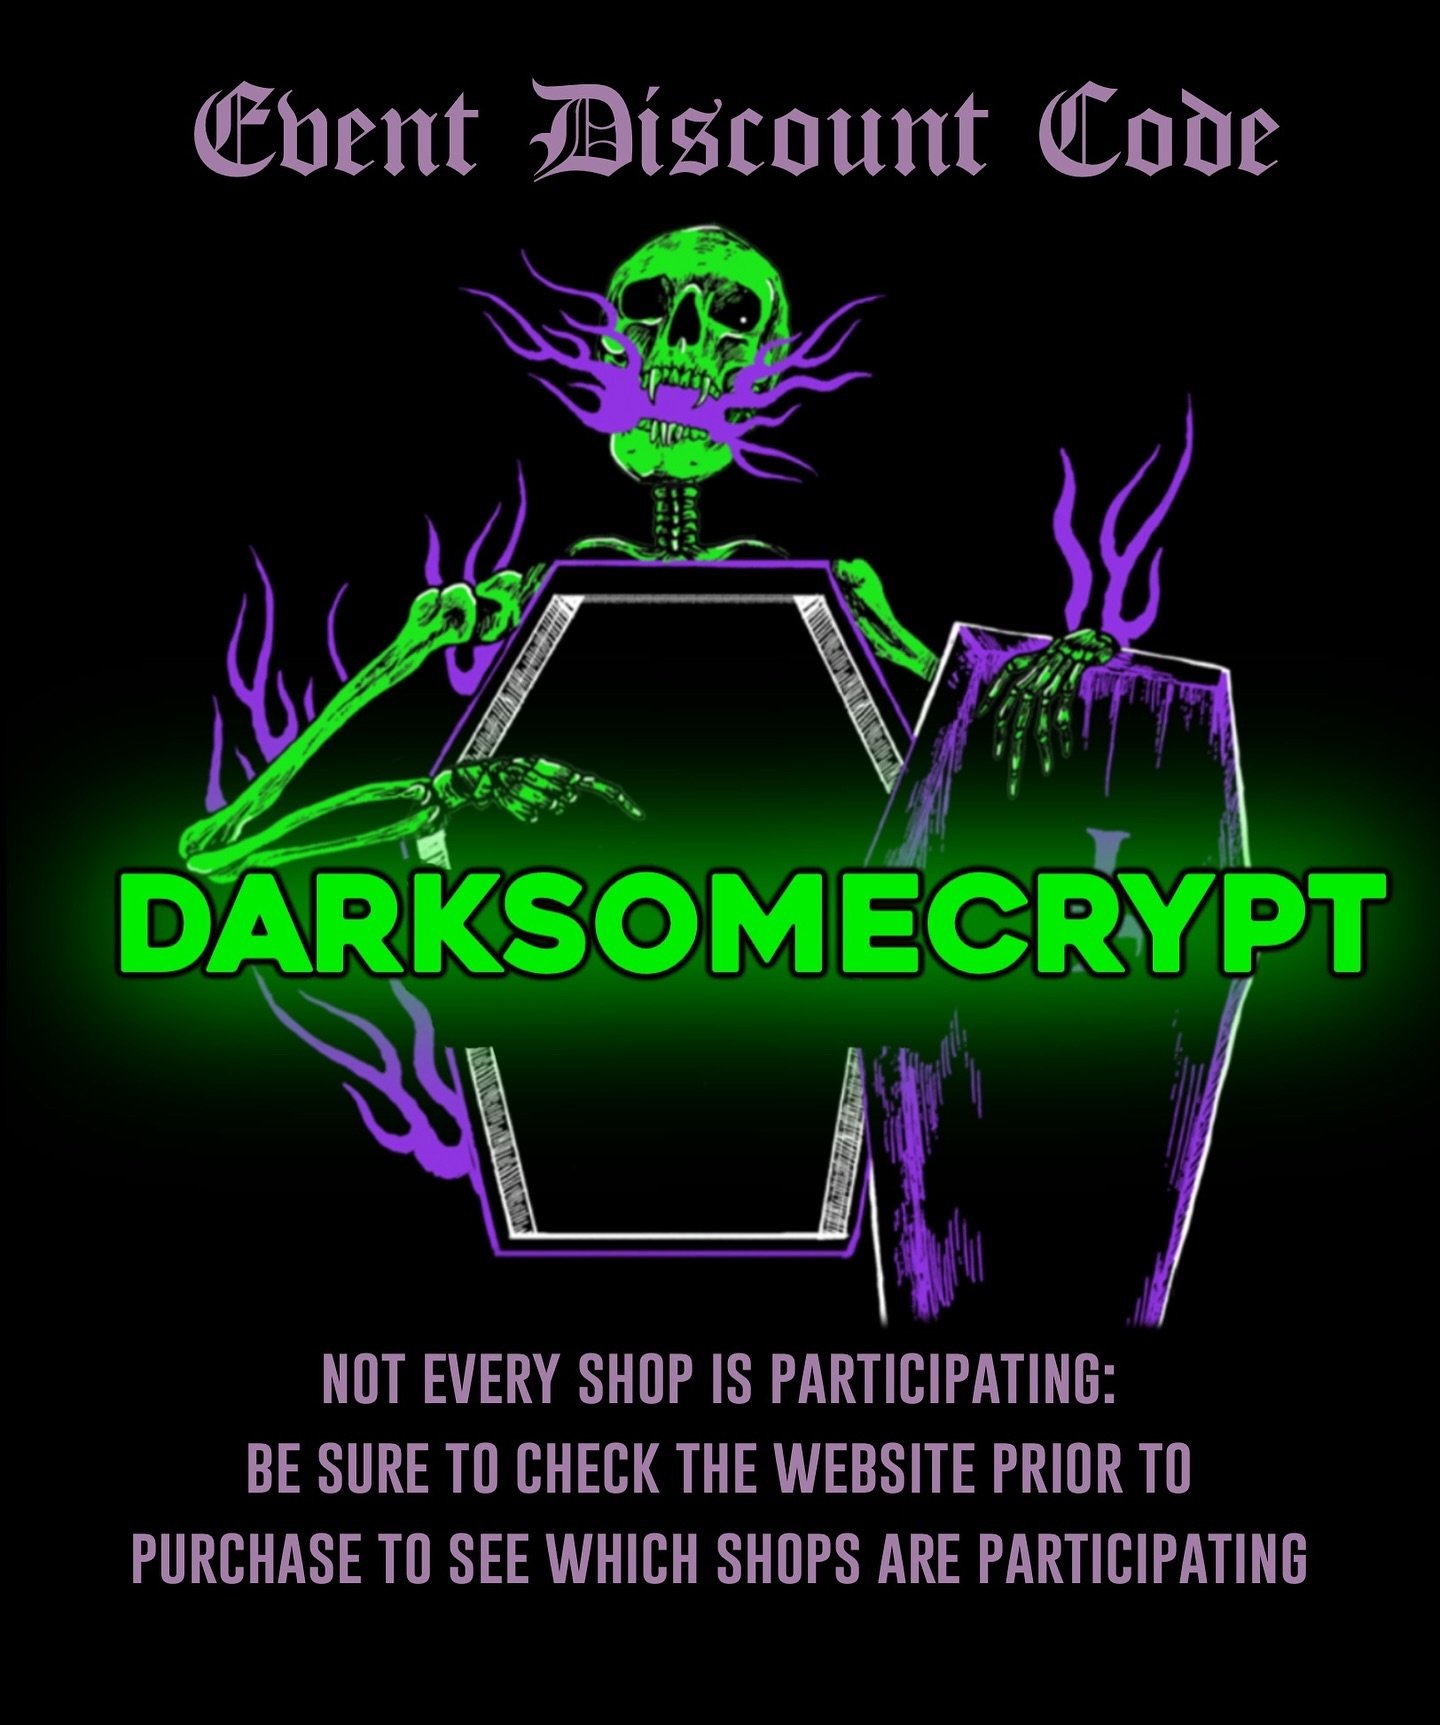 ⚠️ SALE CODE ONLY VALID DURING THE EVENT 4/26-4/28 ⚠️

Many of our artists will be offering a discount using the event discount code: DARKSOMECRYPT. Check out the website to see the specific sales participating artists are offering!

#darksome #darks